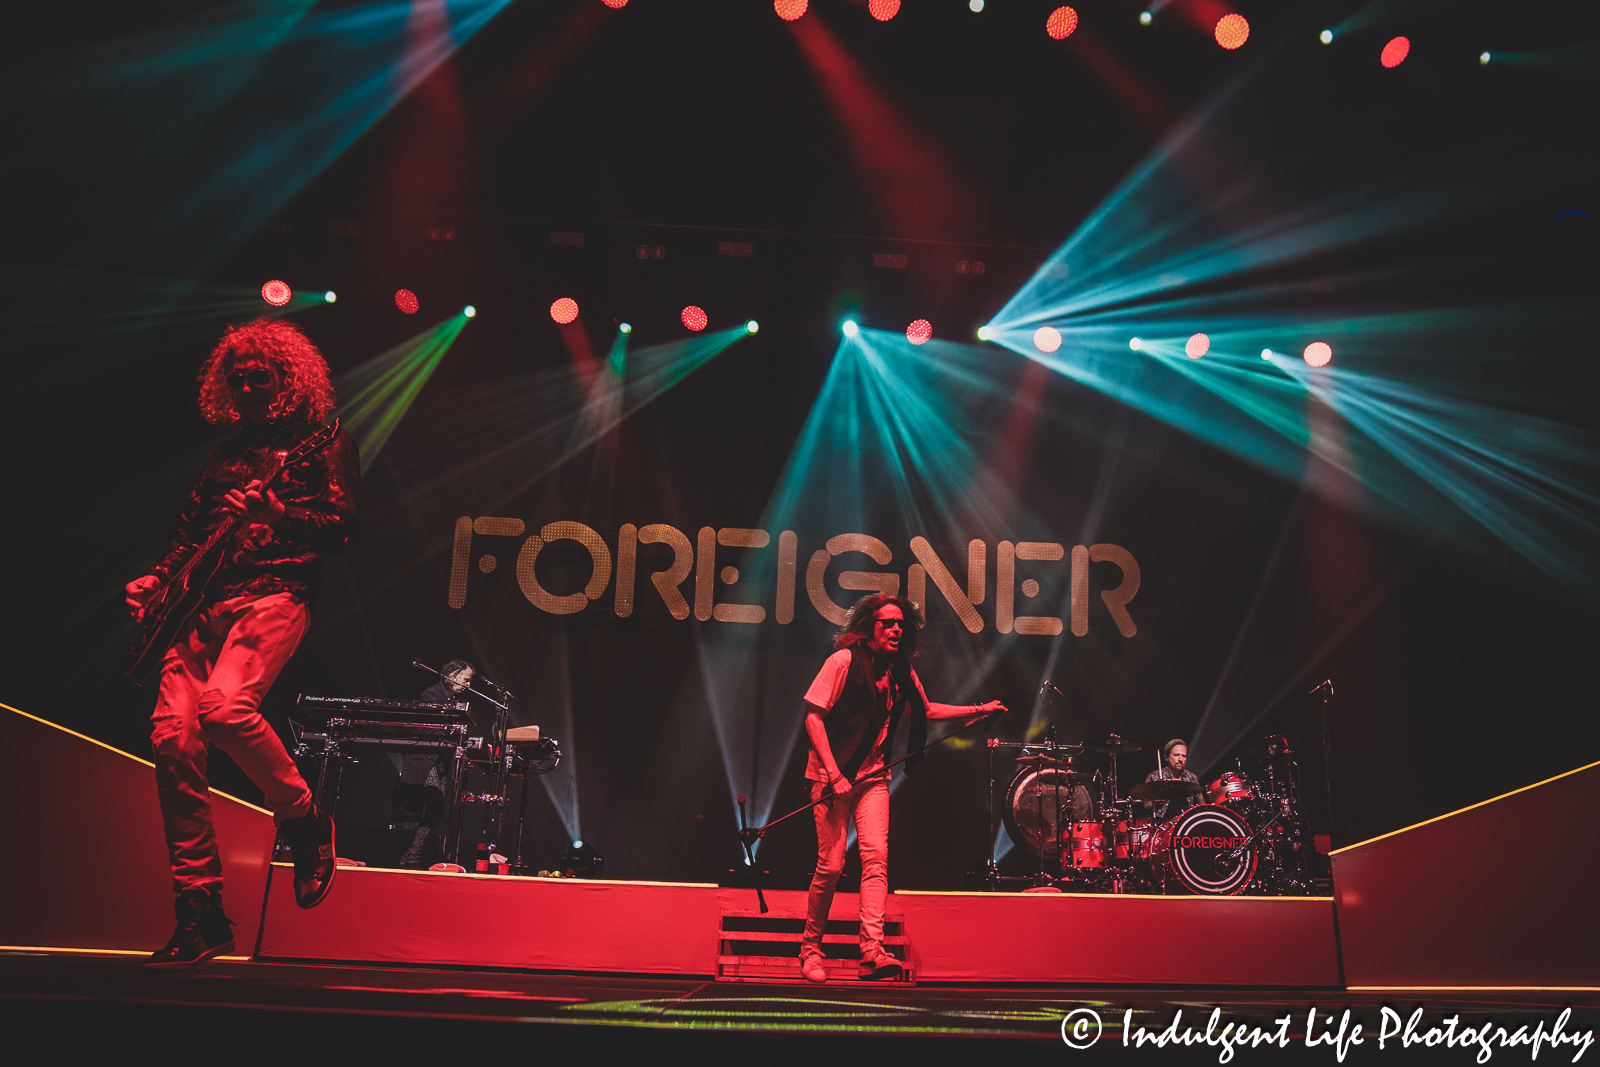 Foreigner taking to the stage as the band performs live at Landon Arena inside Stormont Vail Events Center in Topeka, KS on May 2, 2023.